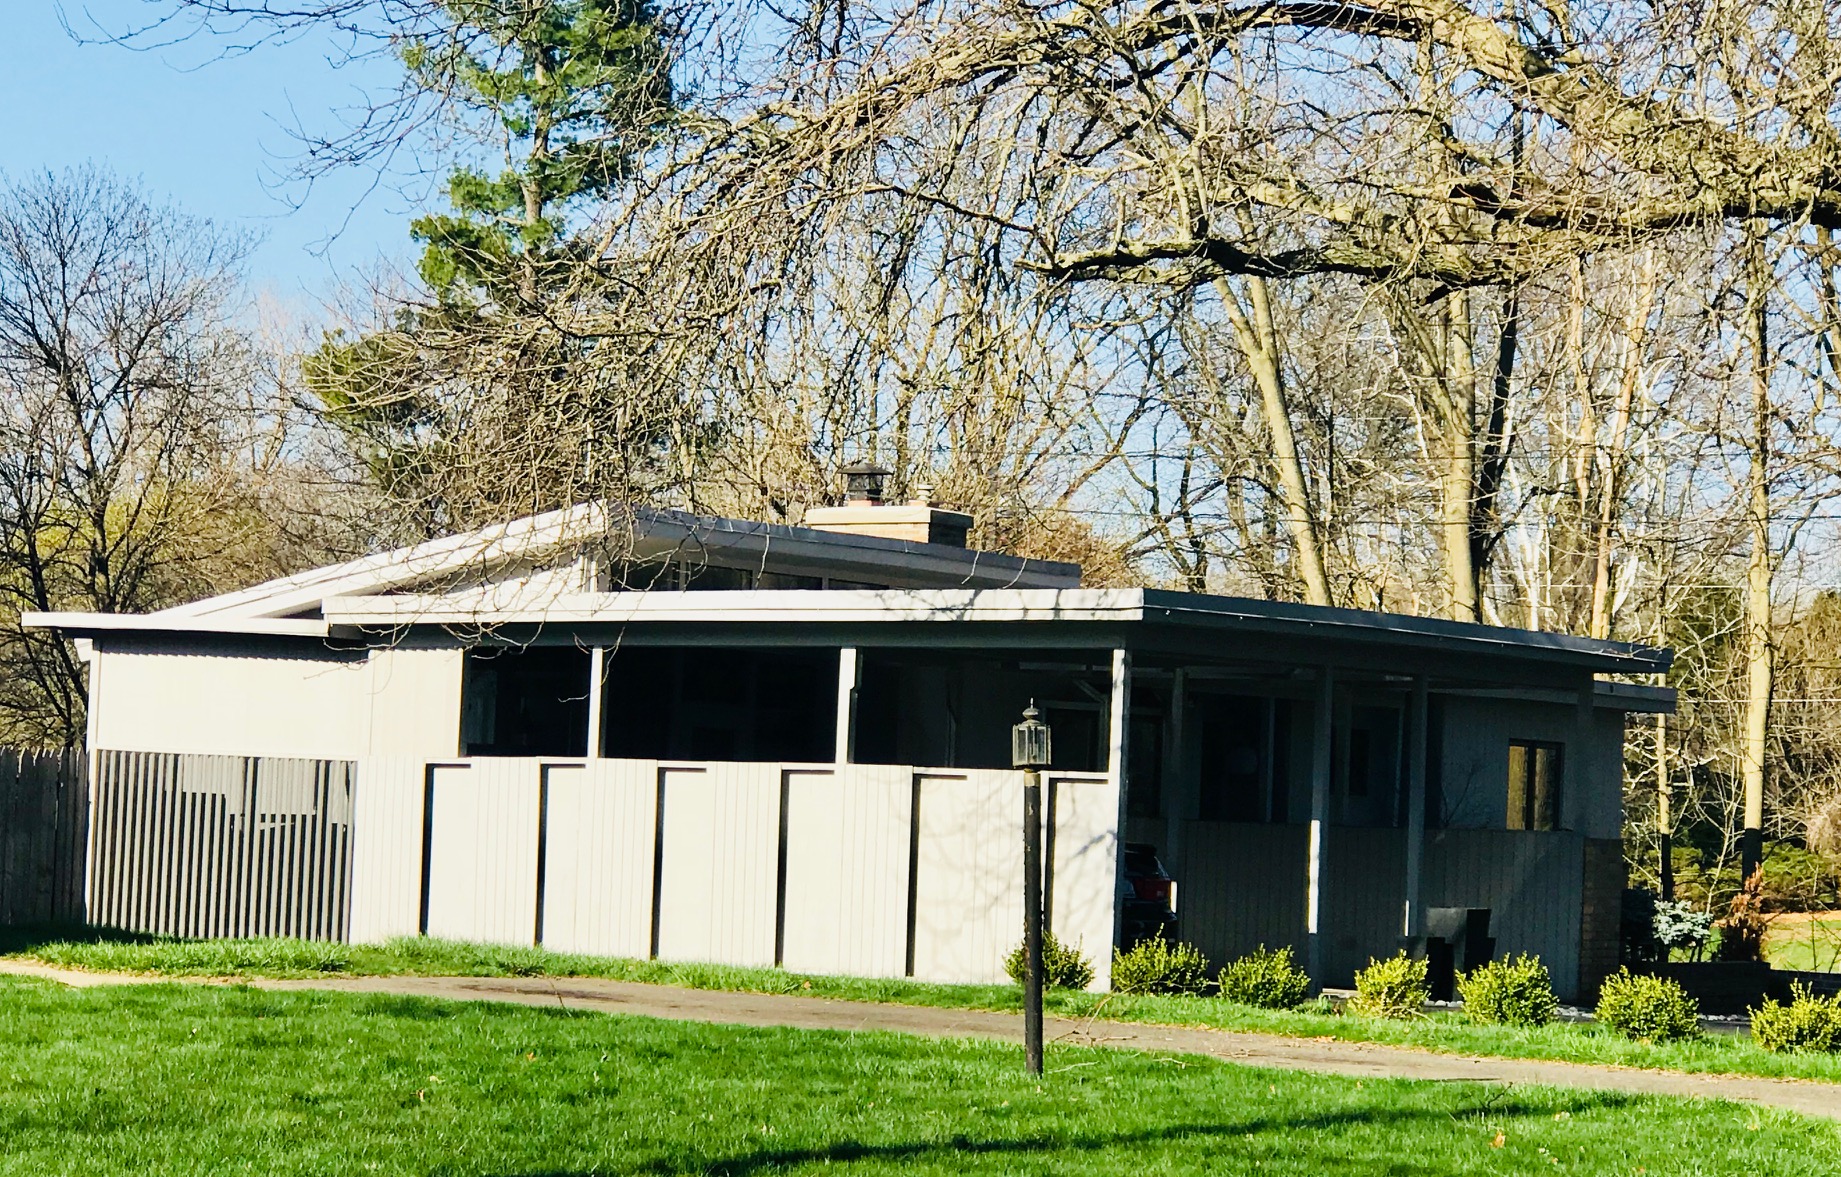 VIEW OF CARPORT AND PORCH